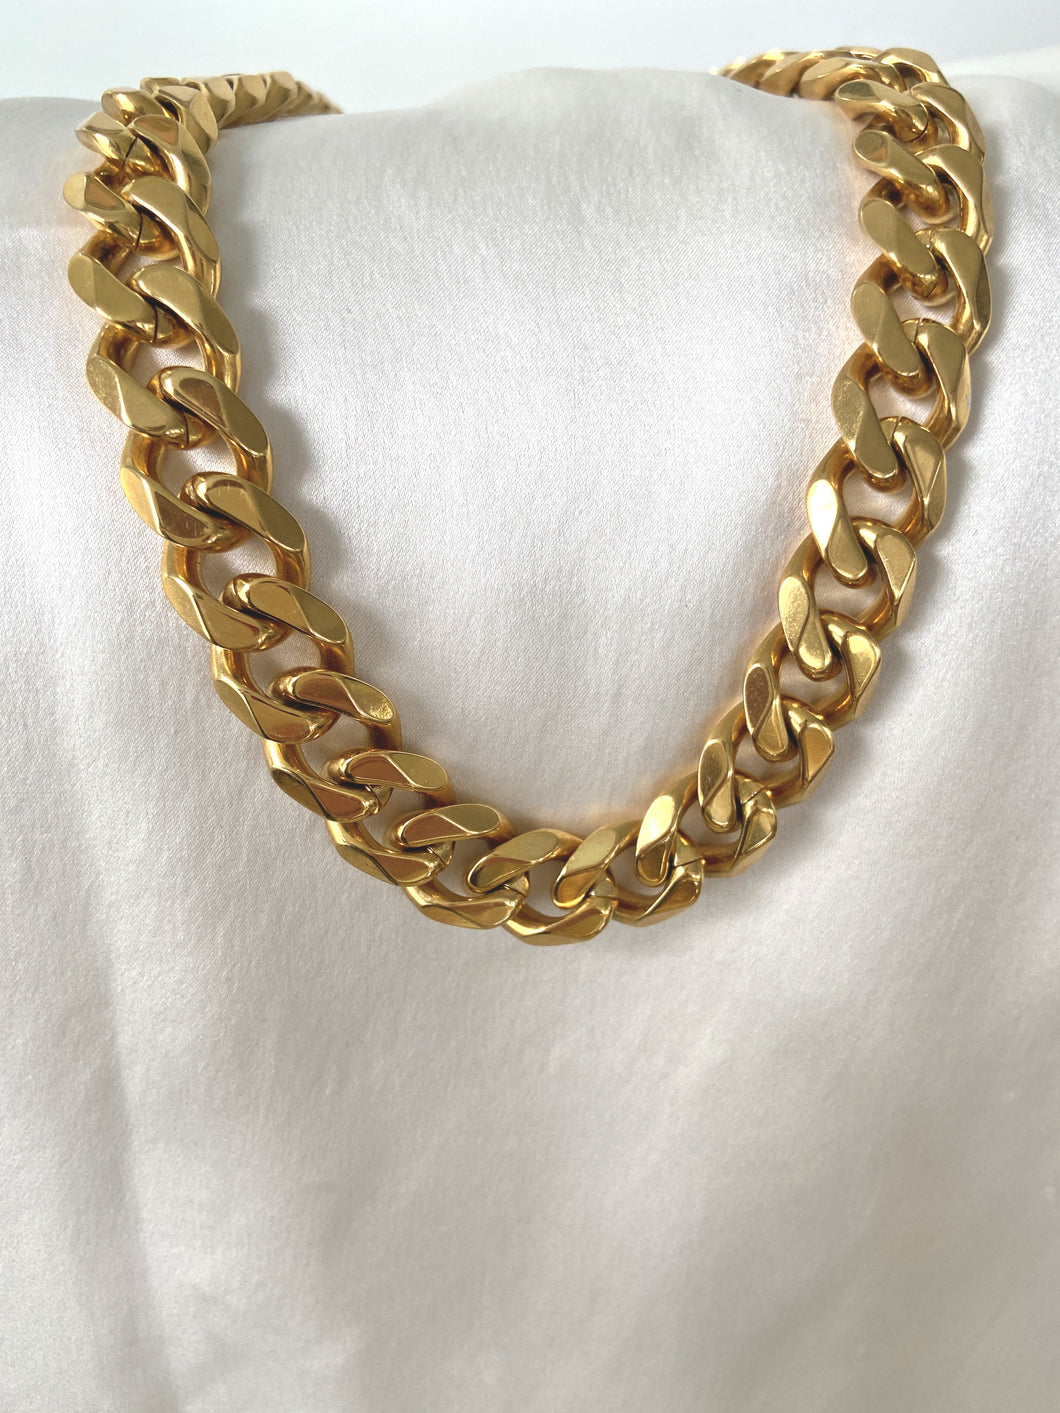 Giselle Gold Filled Statement Choker Necklace